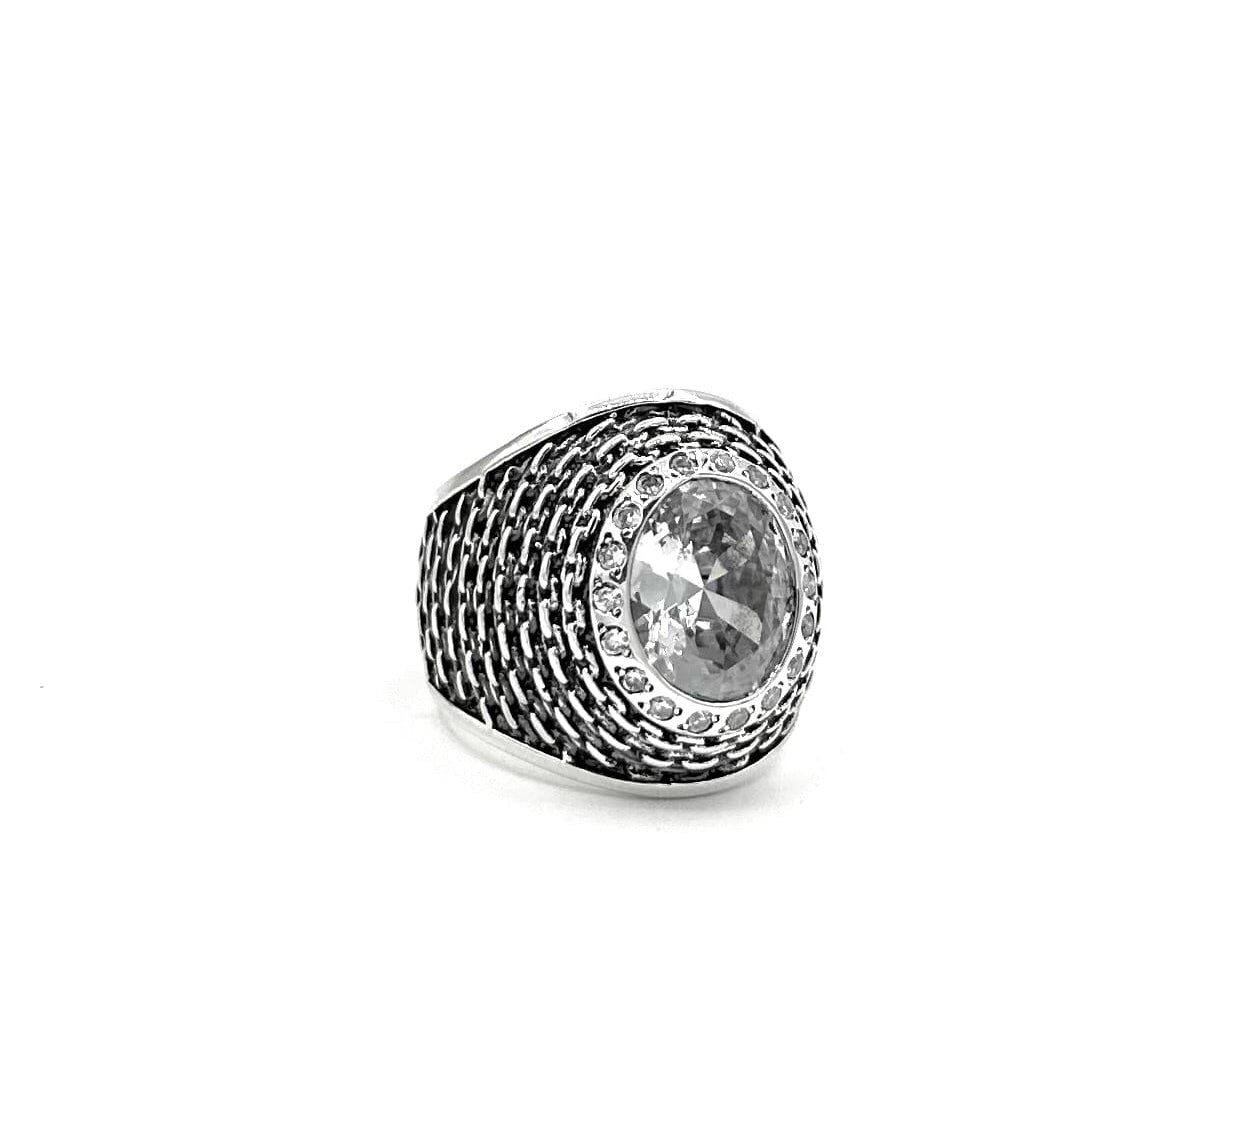 The Unchained Ring pm rings Precious Metals Sterling Silver .925 7 White